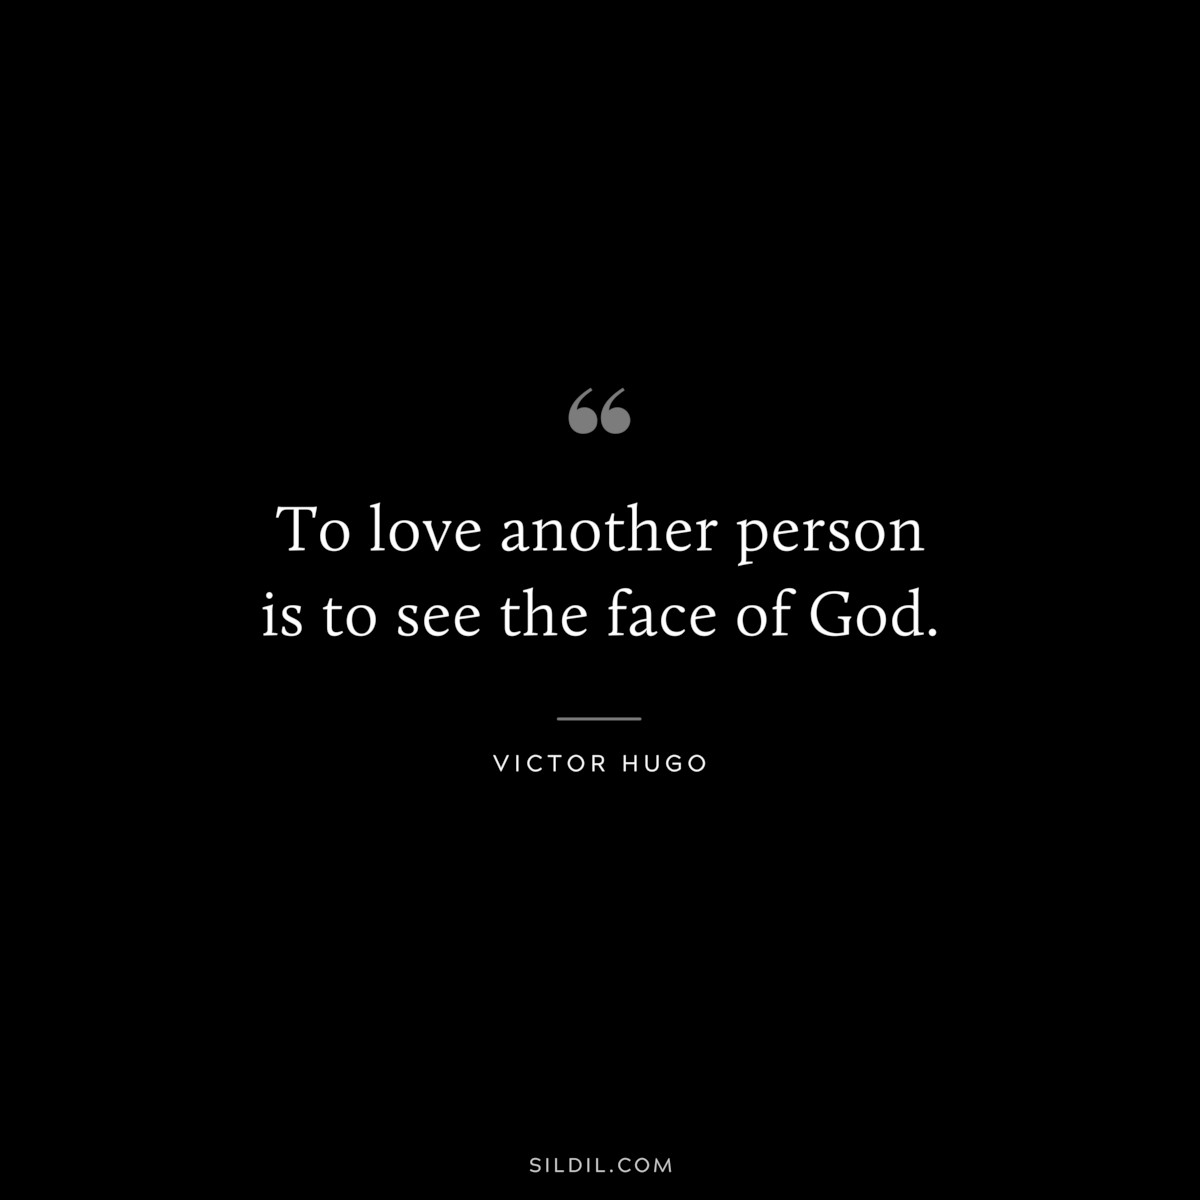 To love another person is to see the face of God.― Victor Hugo